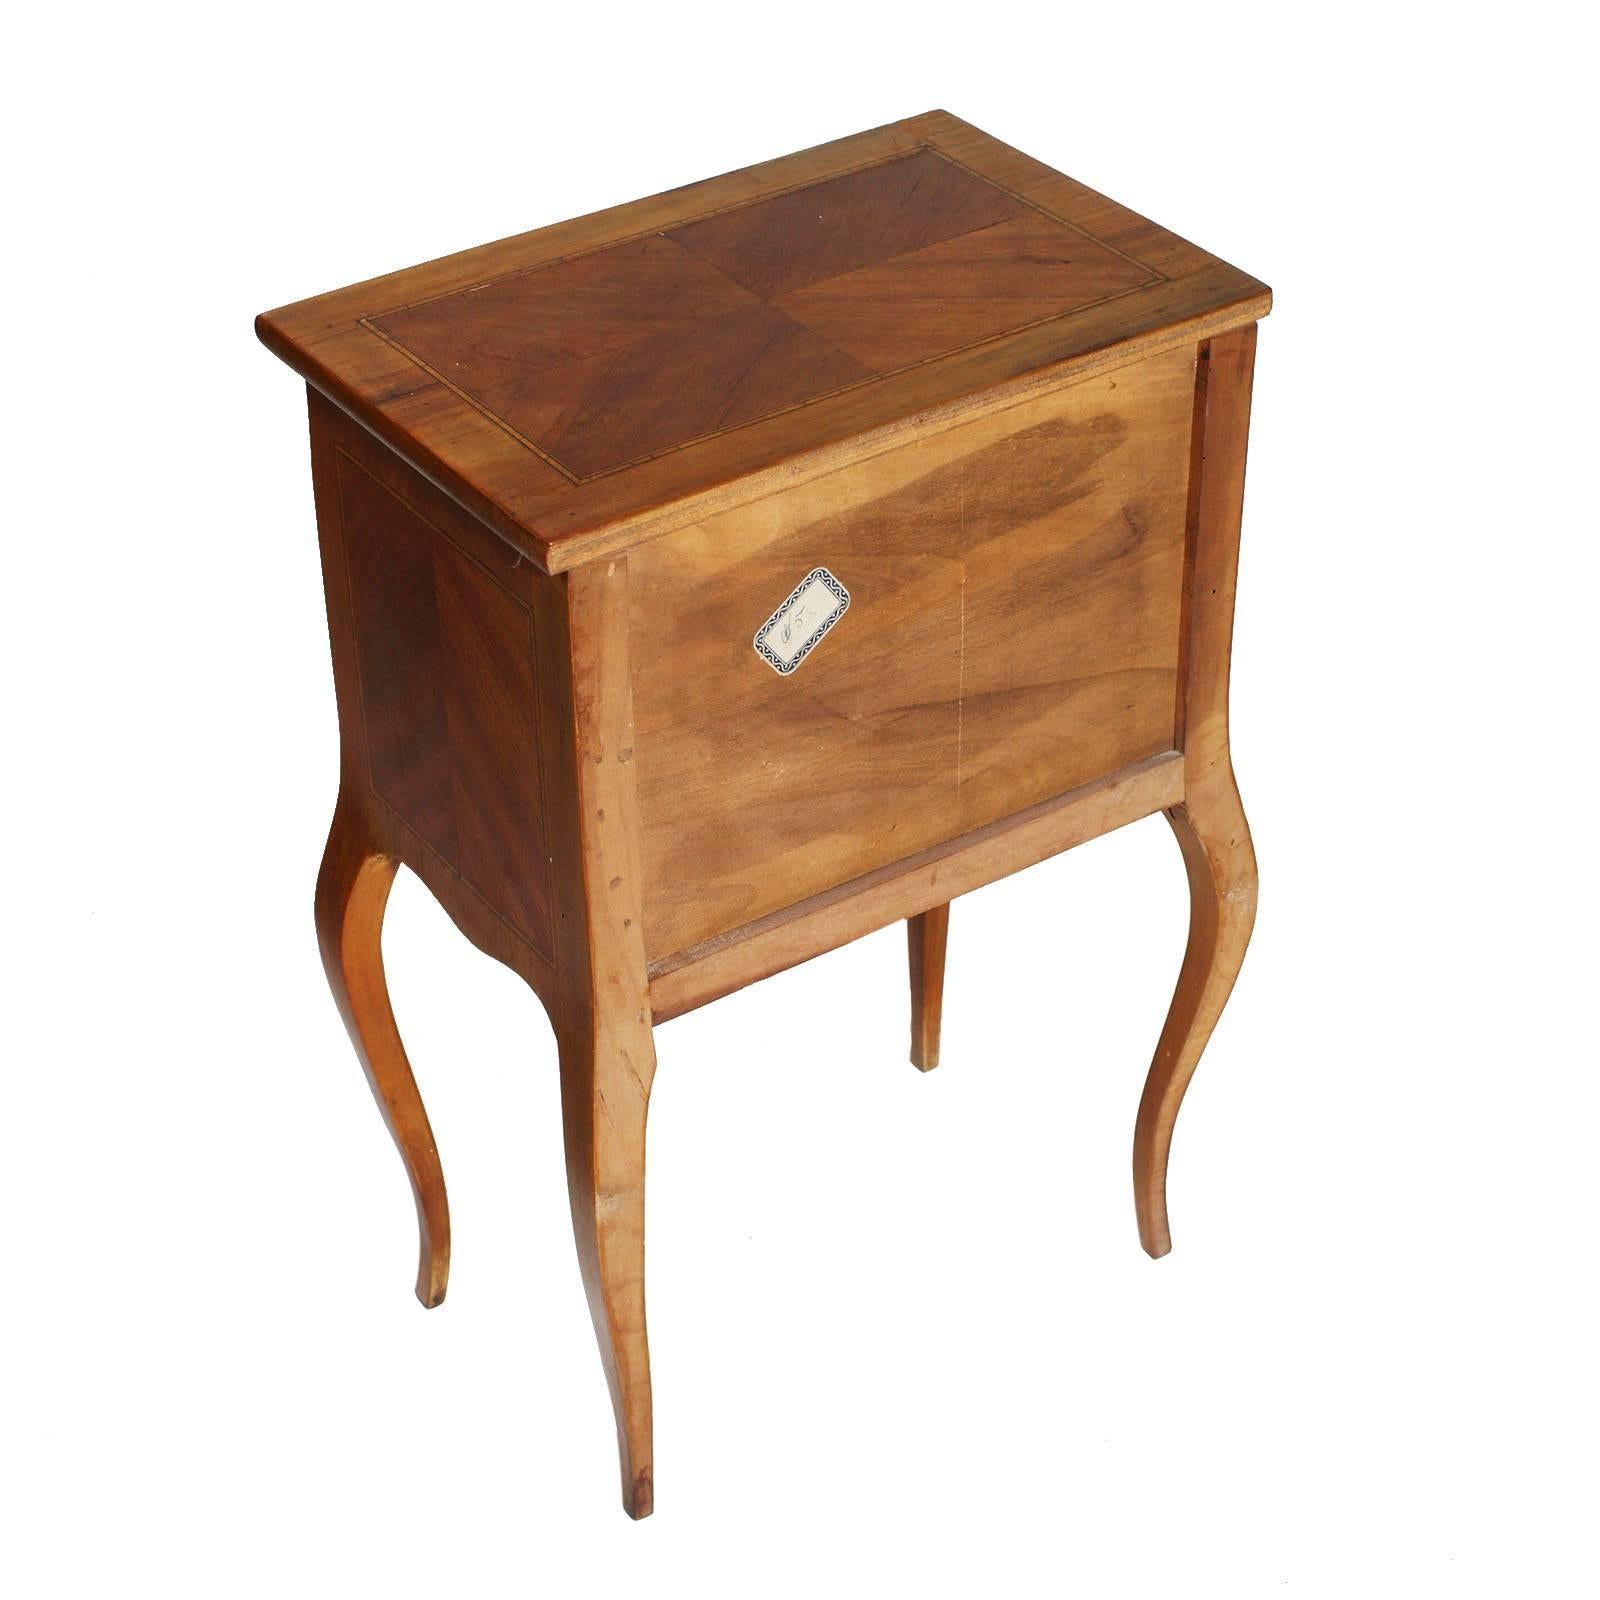 Italian Bovolone 1920s Side Cabinet, Nightstand, in Walnut and Walnut Inlay with Maple For Sale